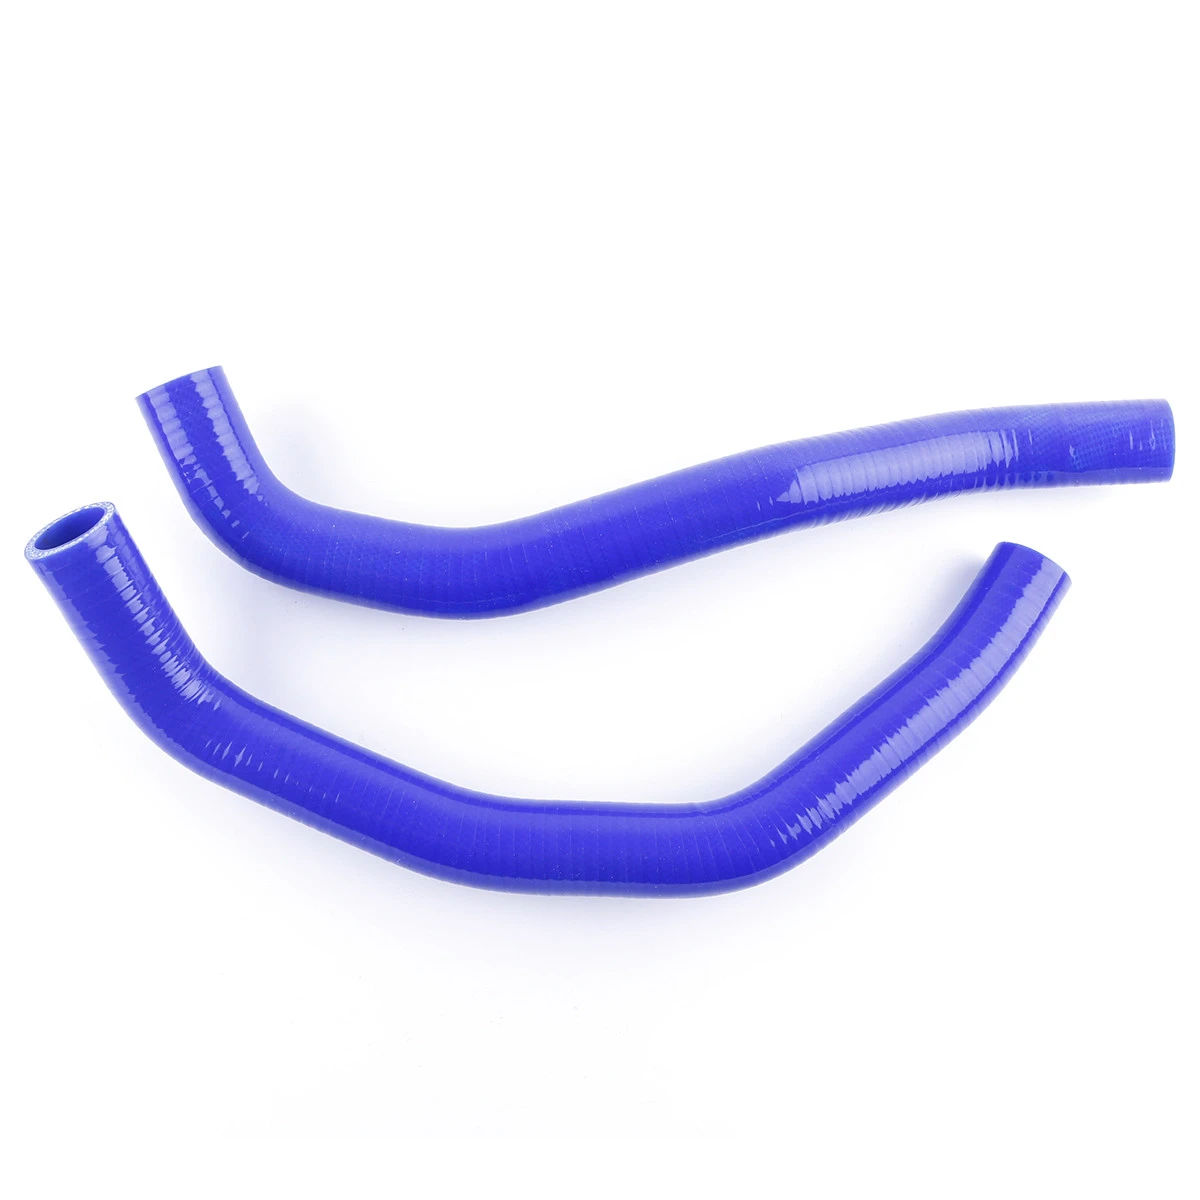 Silicone Radiator Coolant Hose Kit suitable for 03-07 ACCORD CM 2.4L l4 K24A